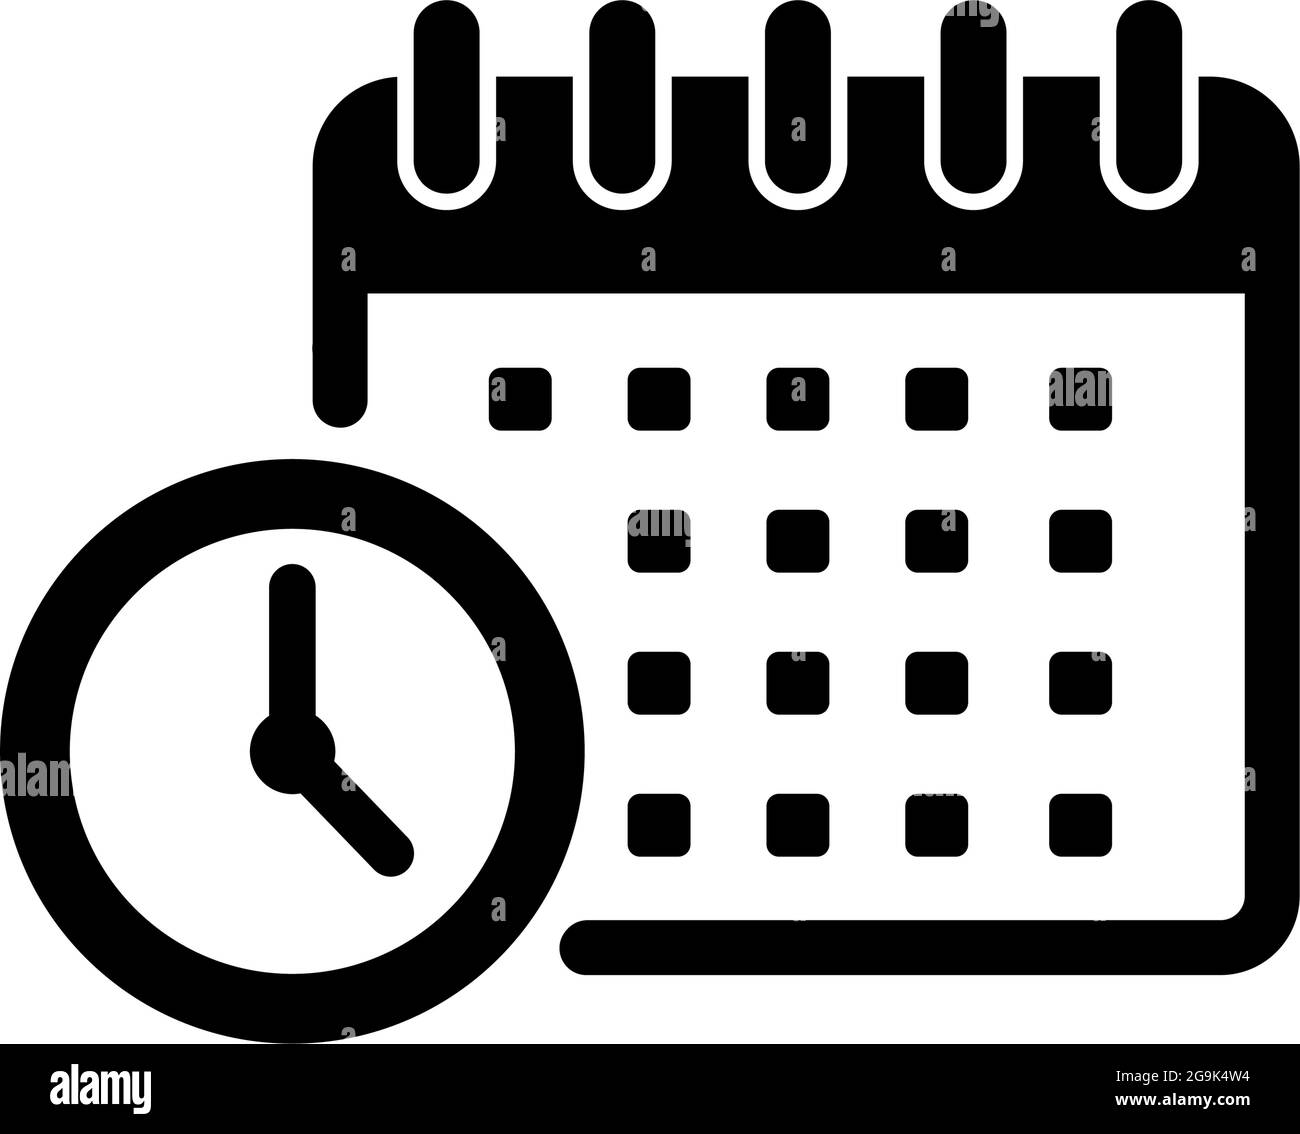 Schedule, task management vector icon illustration Stock Vector